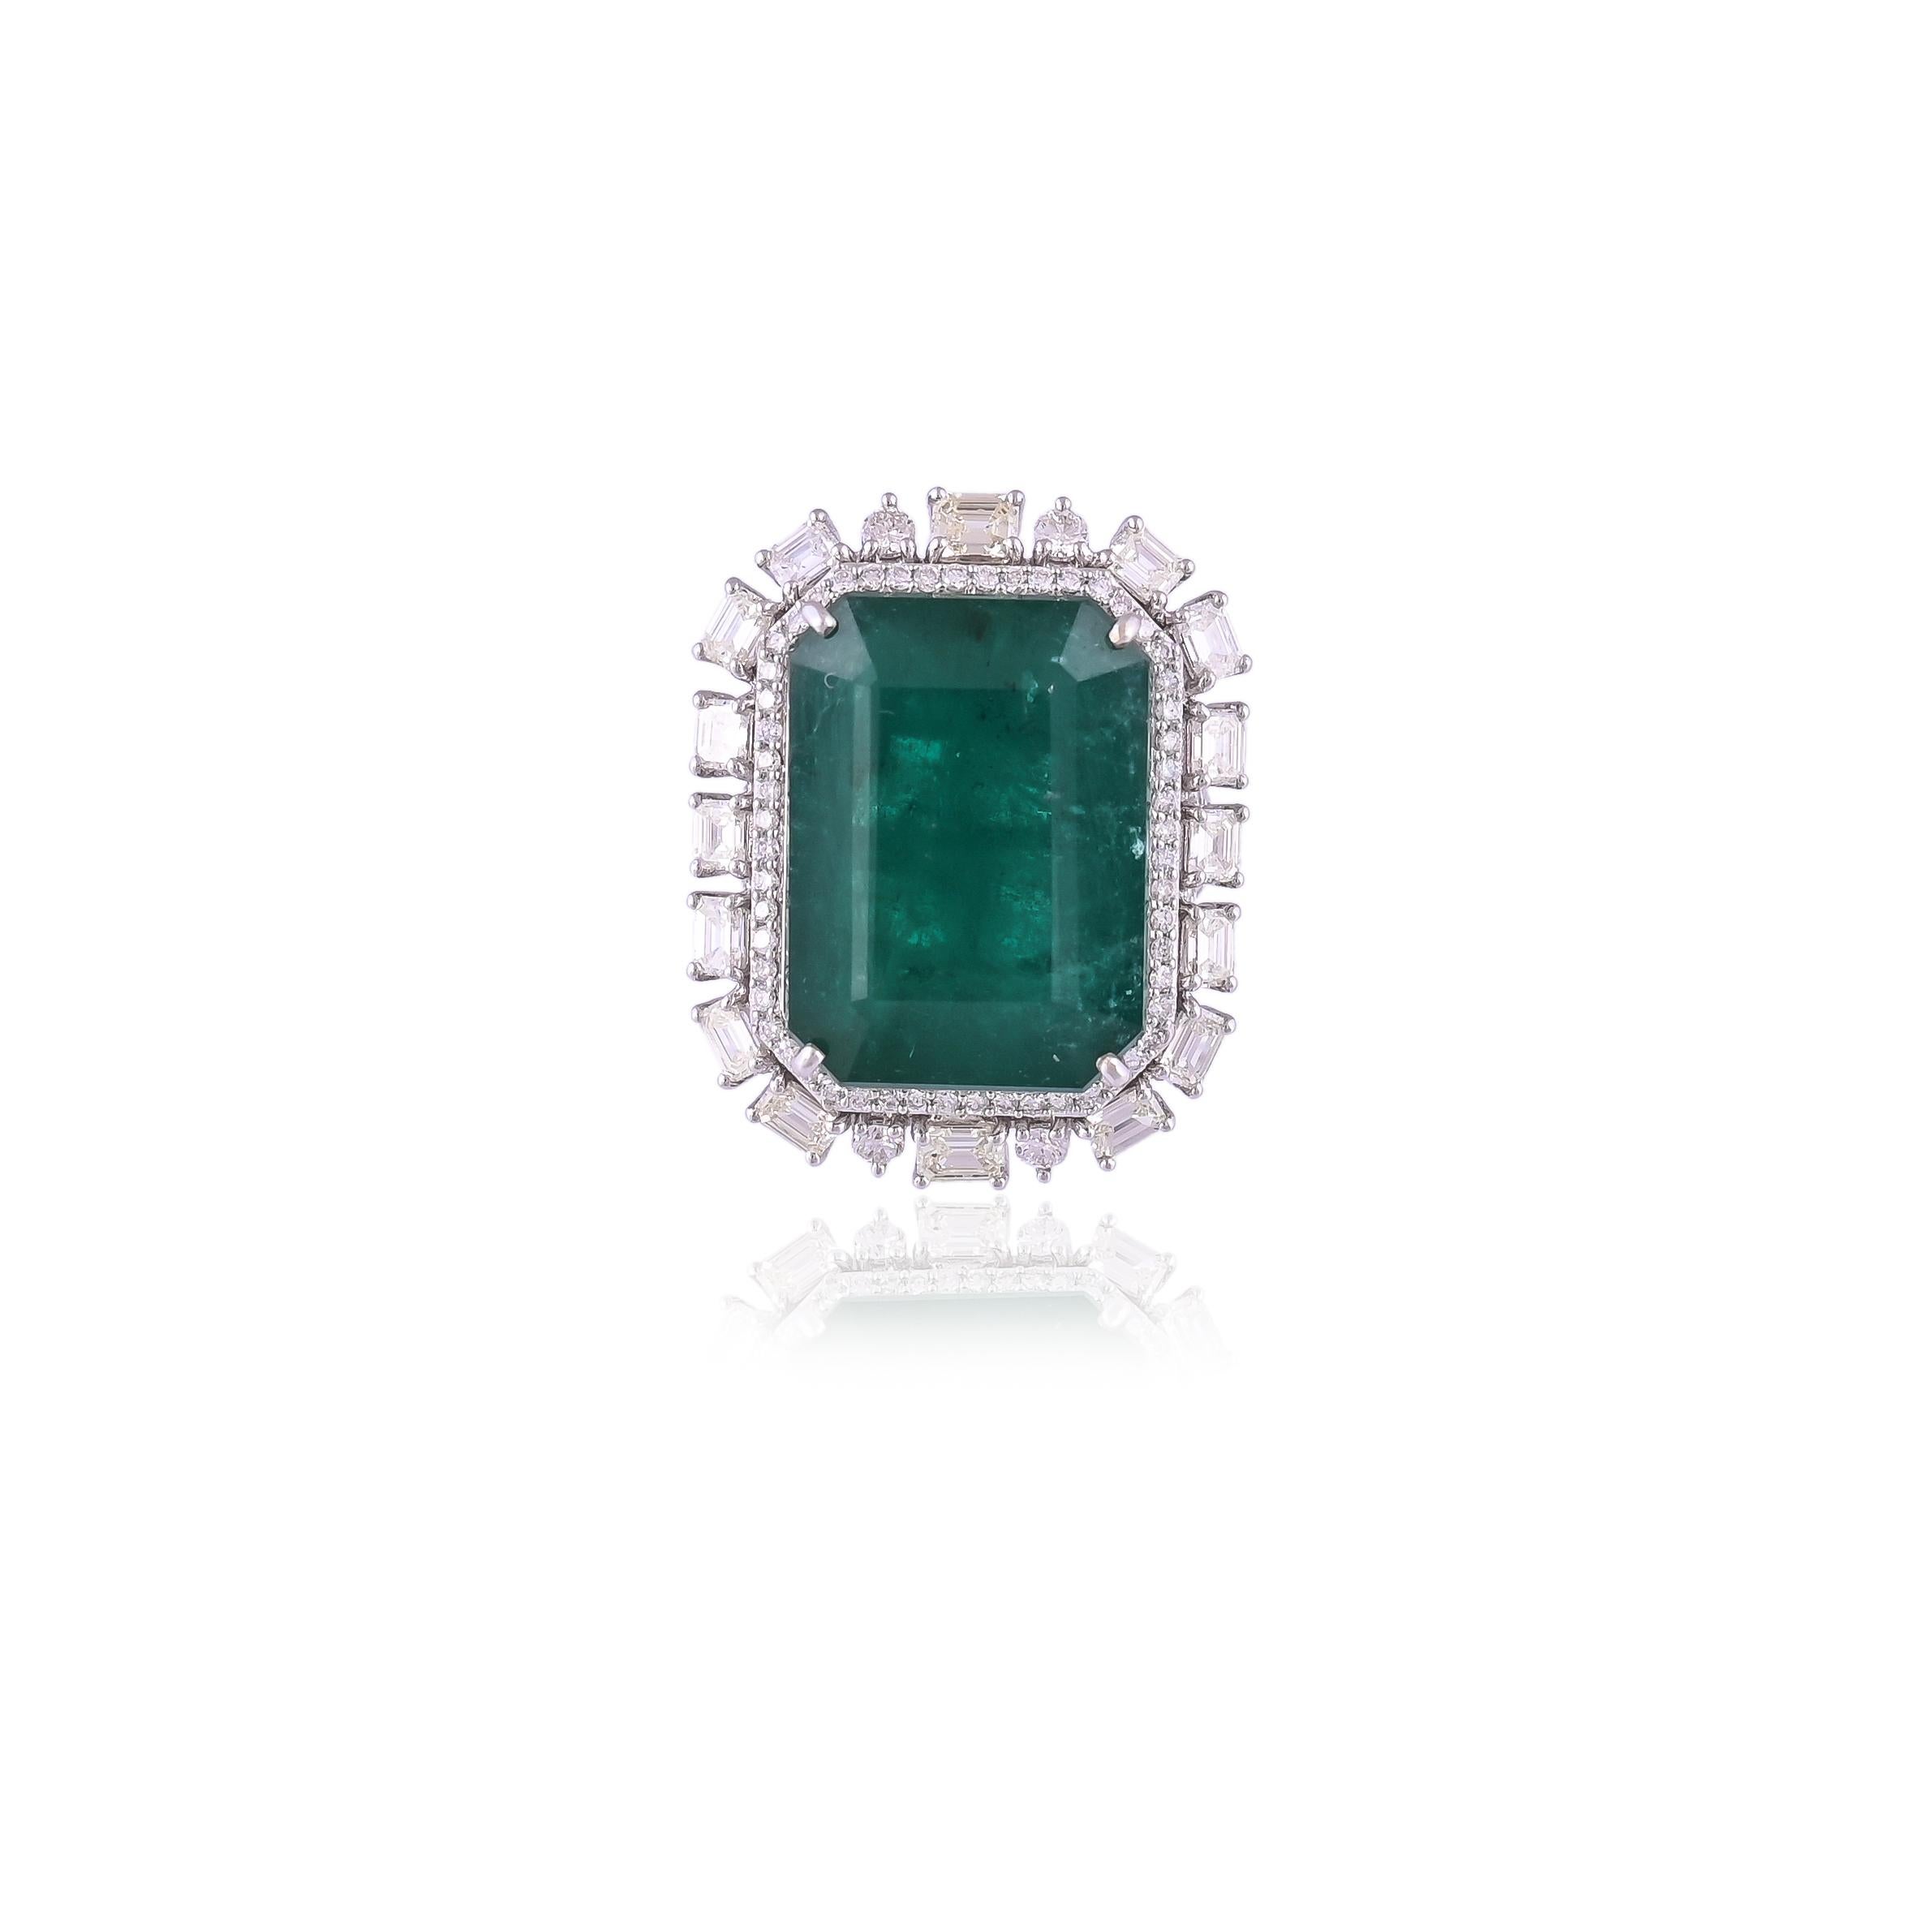 A very beautiful and one of  kind, Emerald Cocktail/Engagement Ring set in 18K Gold & Diamonds. The weight of the Emerald is 38.26 carats. The Emerald is of Zambian origin and is completely natural without any treatment. The weight of the Diamonds